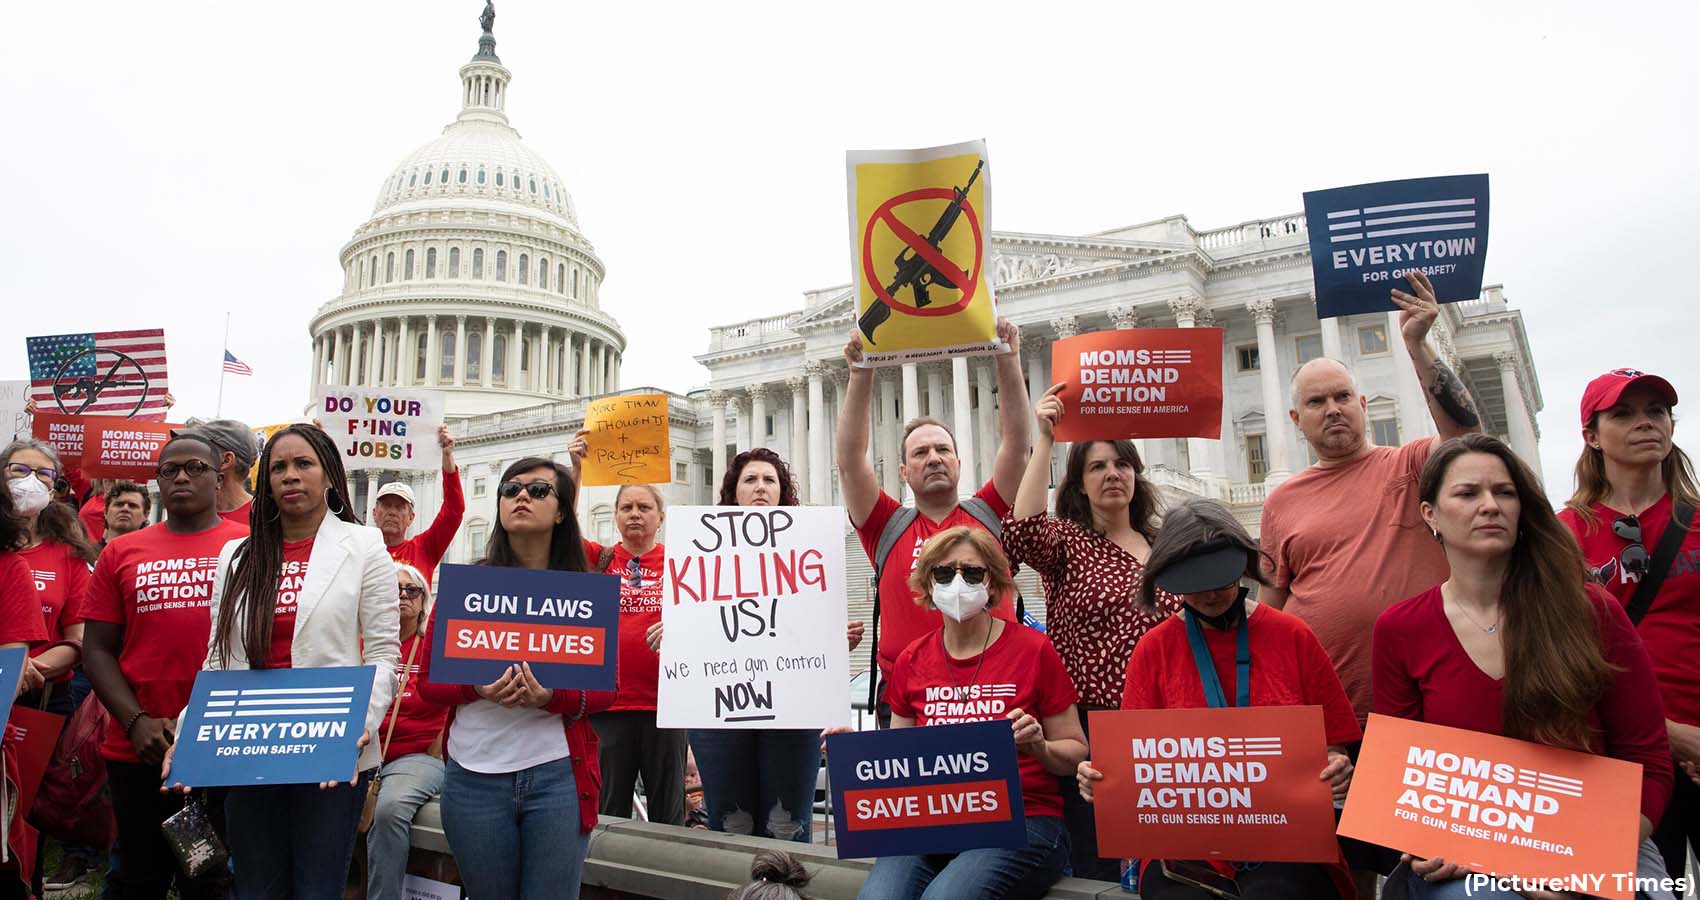 After Losing Thousands of Lives To Gun Violence, US Finally On Way to Regulate Guns